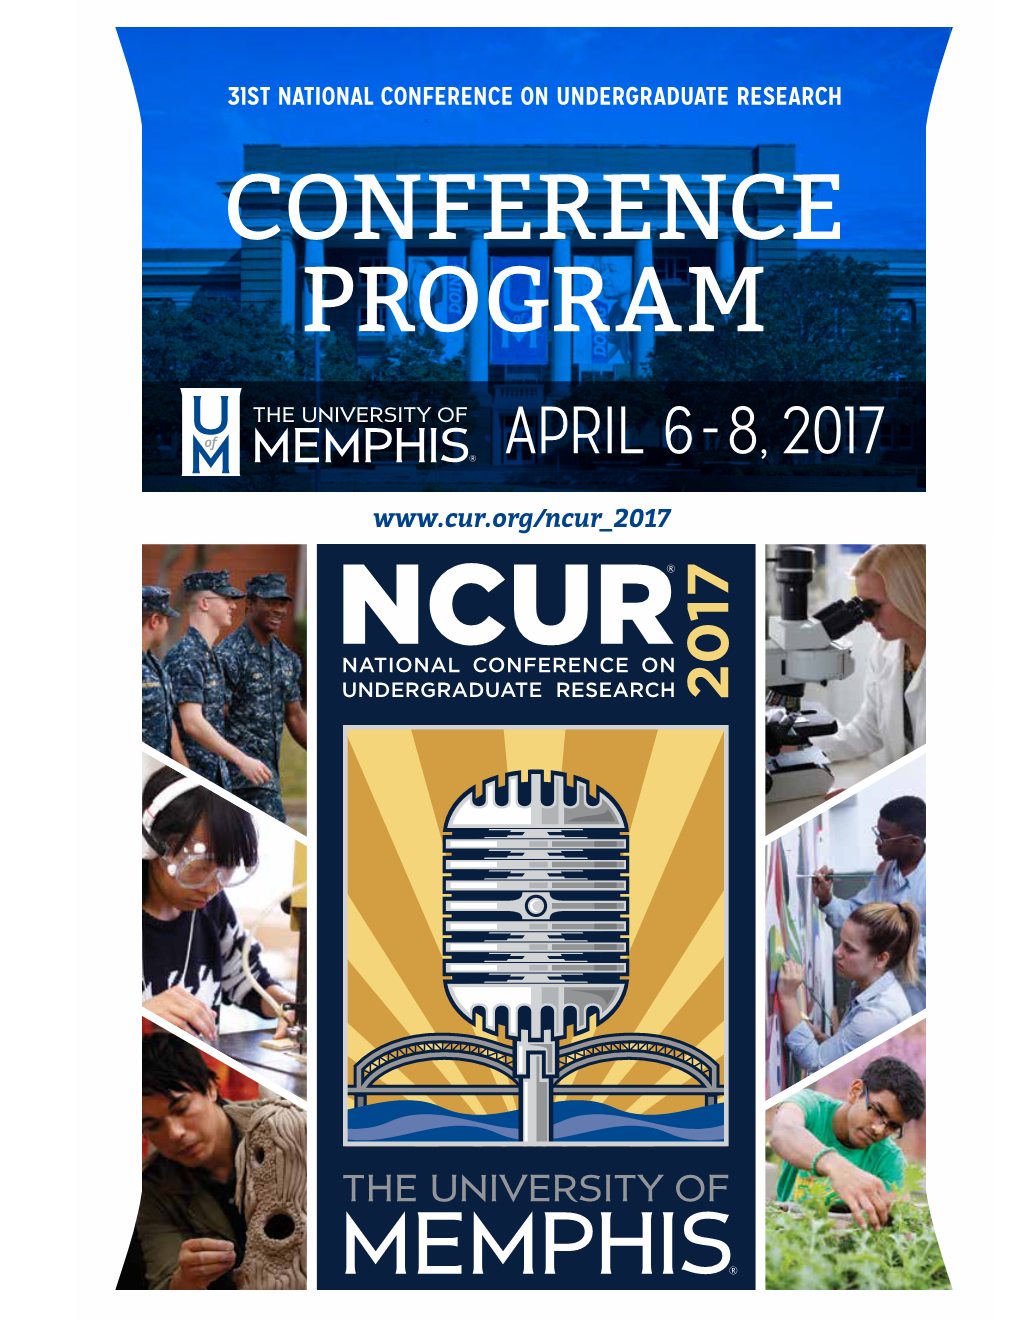 National Conference for Undergraduate Research at the University of Memphis